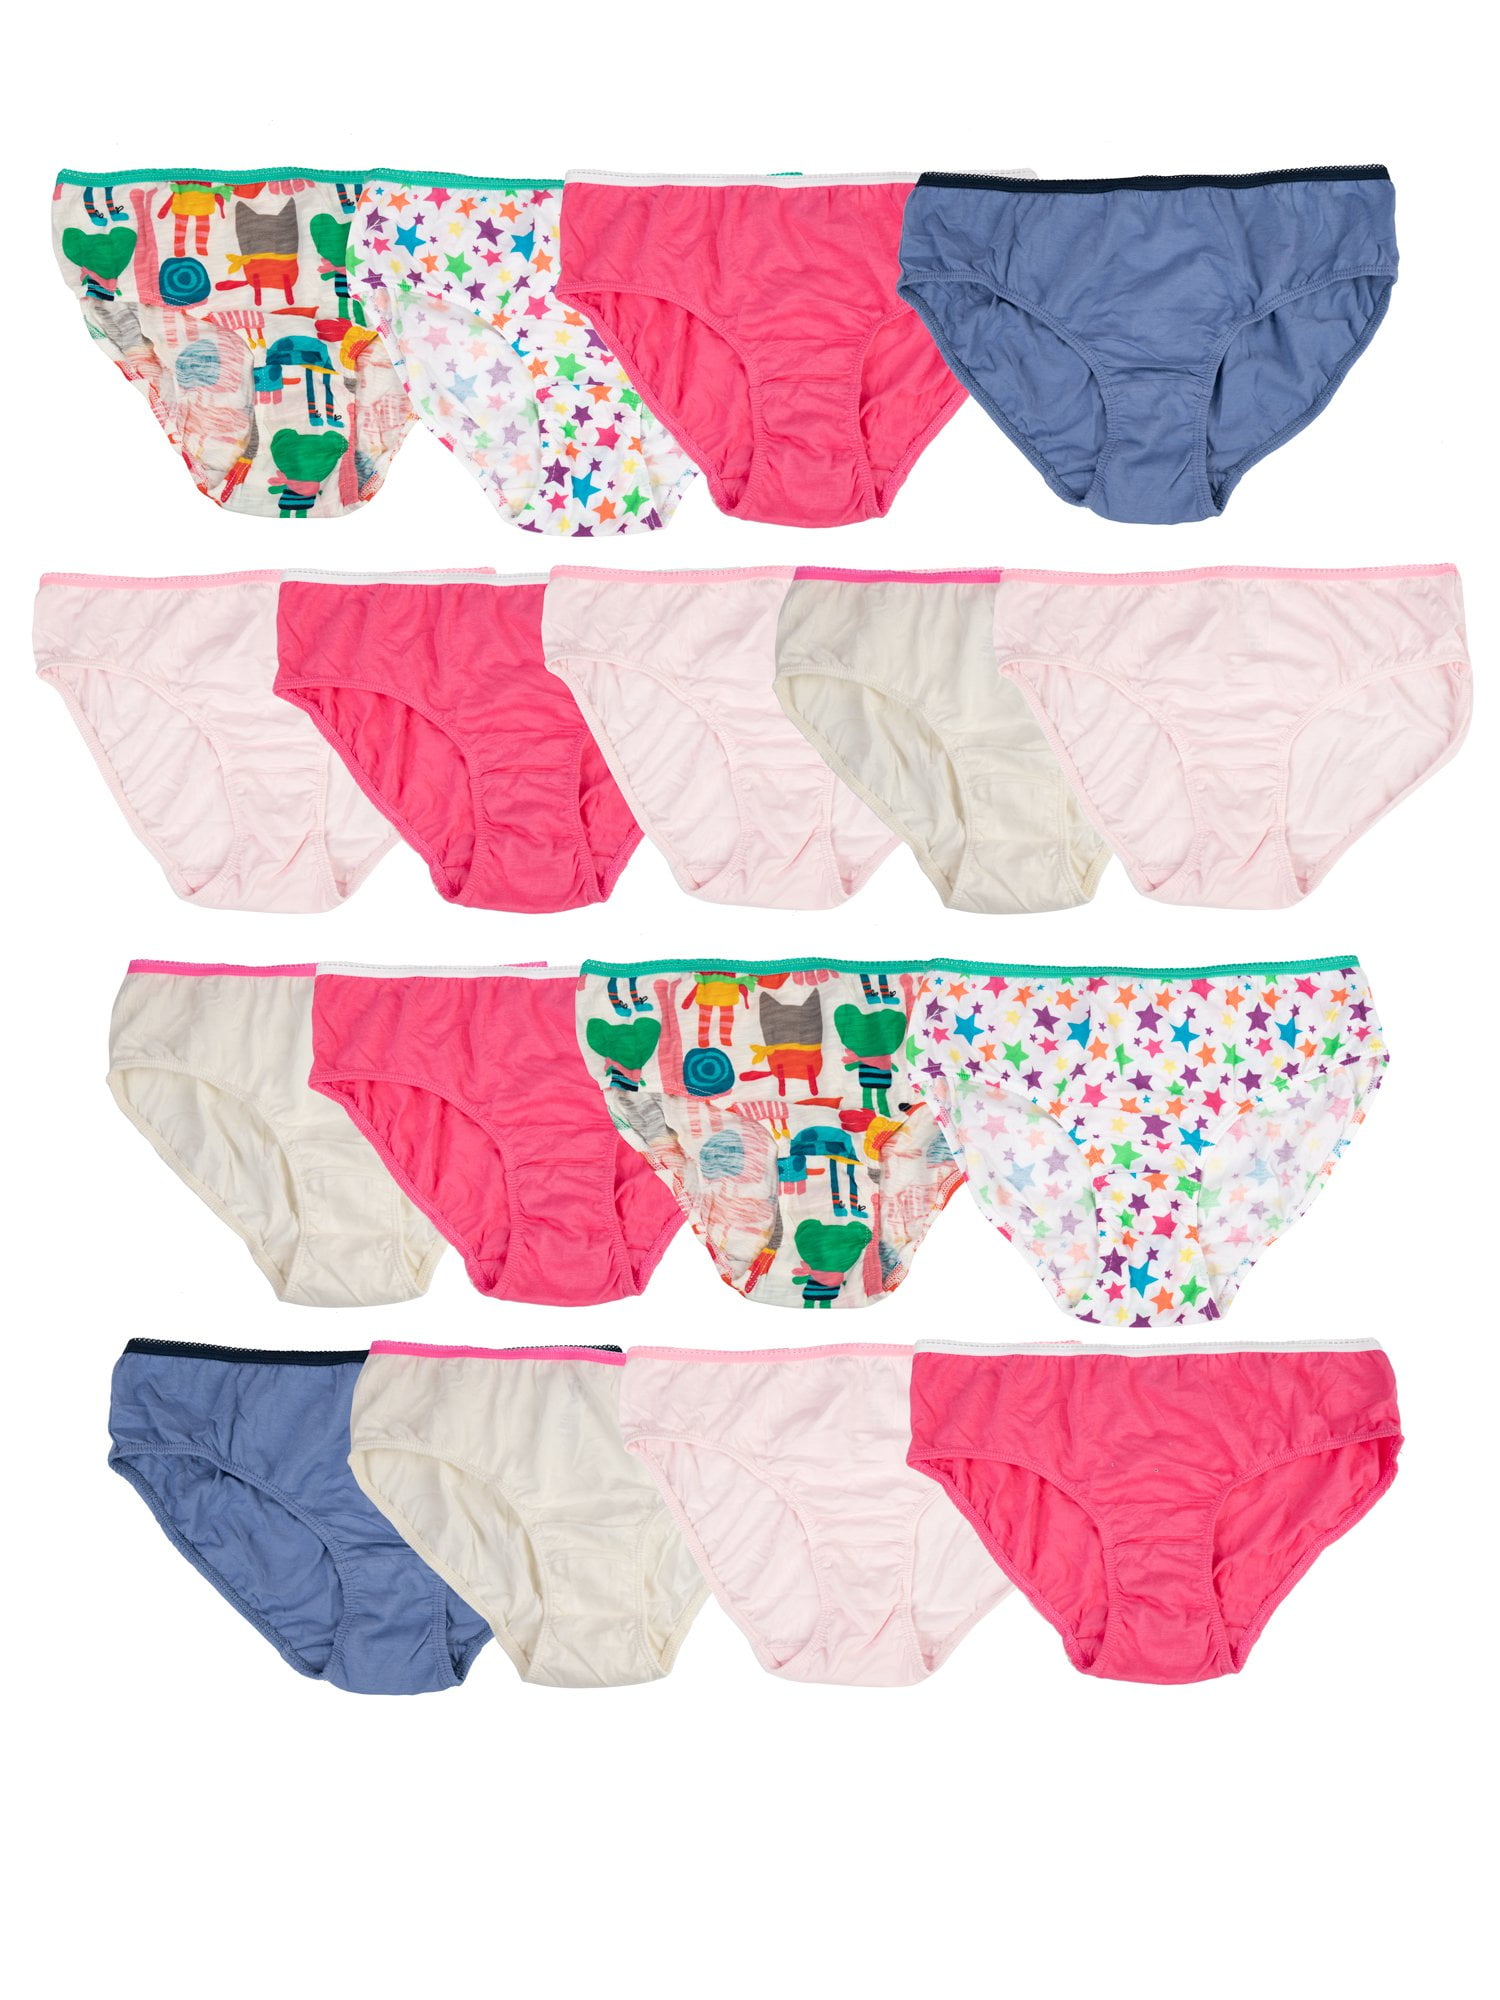 Girl's Trim 100% Cotton Panties Briefs, 14 Pack Assorted Colors and Styles - Walmart.com